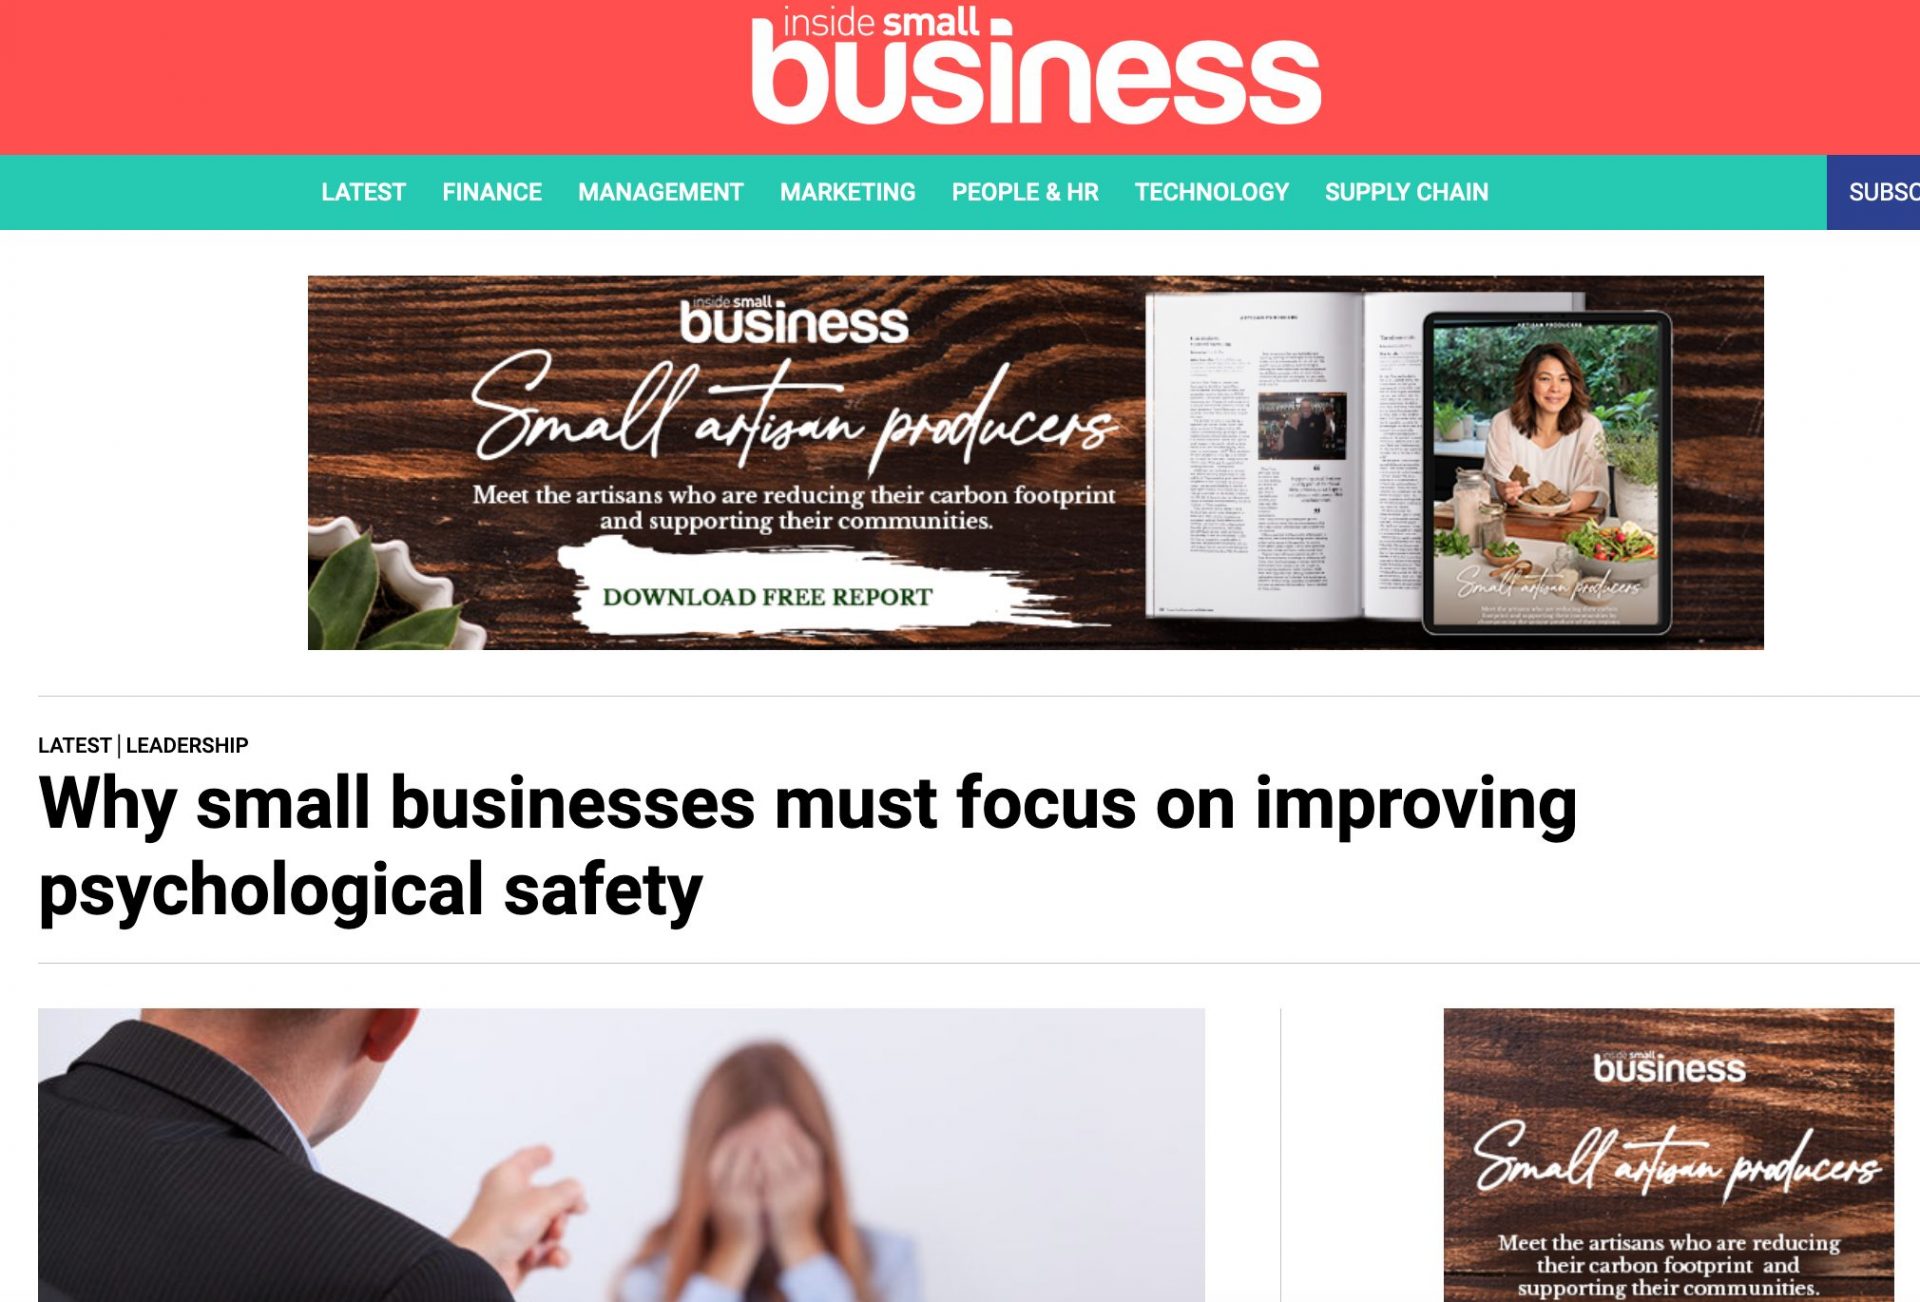 Inside Small Business - Why small businesses must focus on improving psychological safety